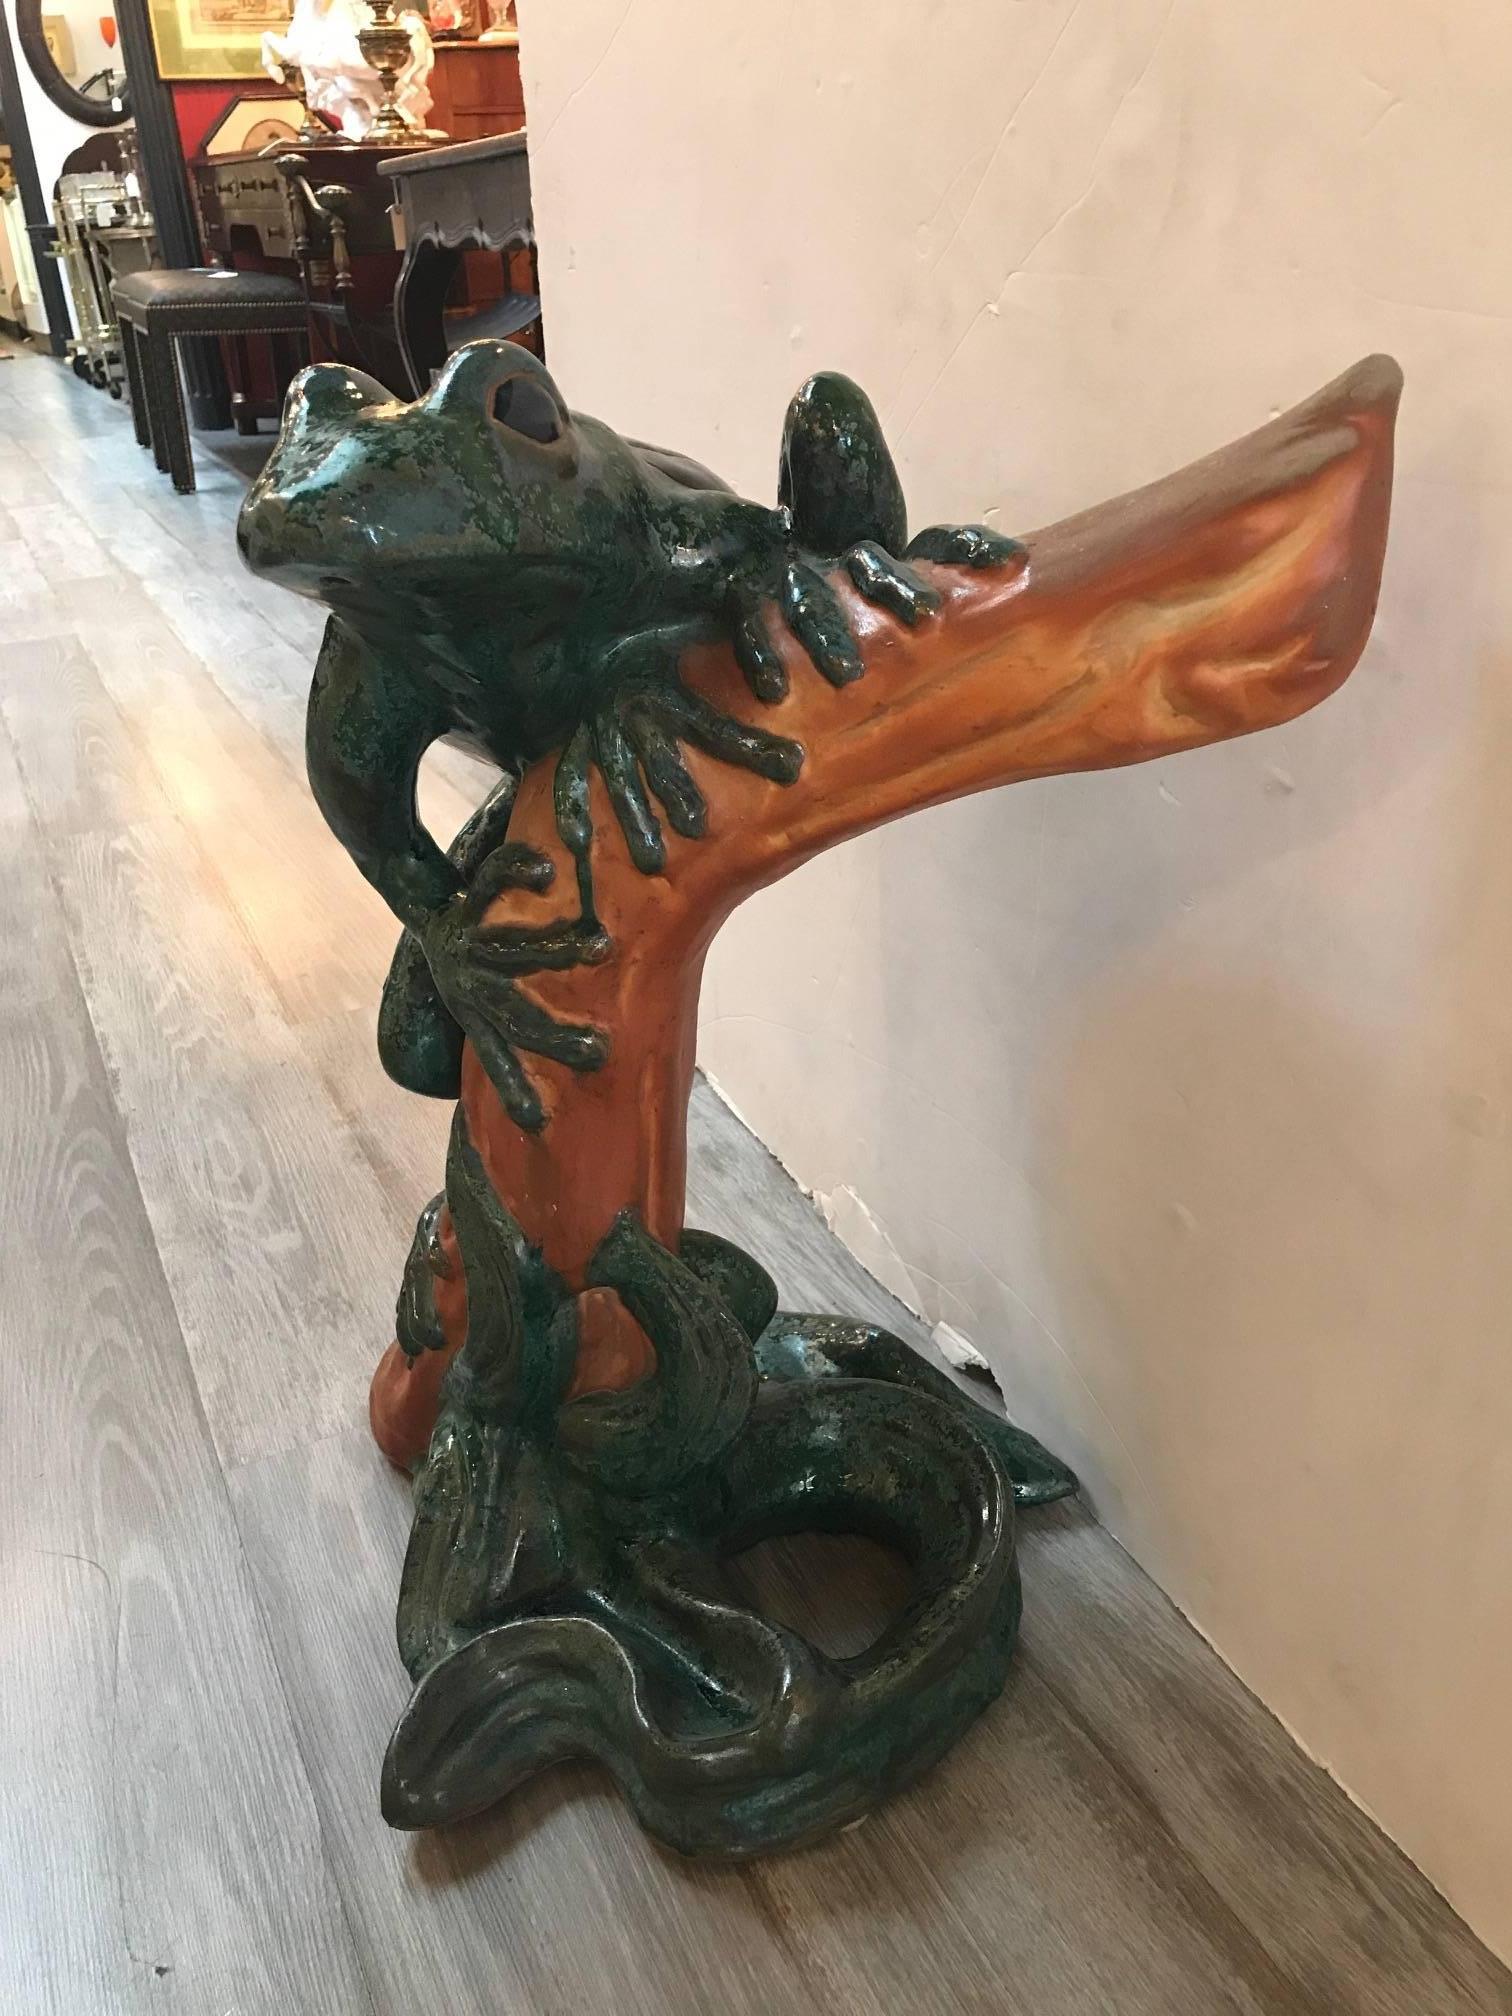 Vibrant glazed pottery sculpture of a frog made in Italy in the mid-20th century. The posed frog, on wood motif branch with unusual fire glazed green and blue finish.